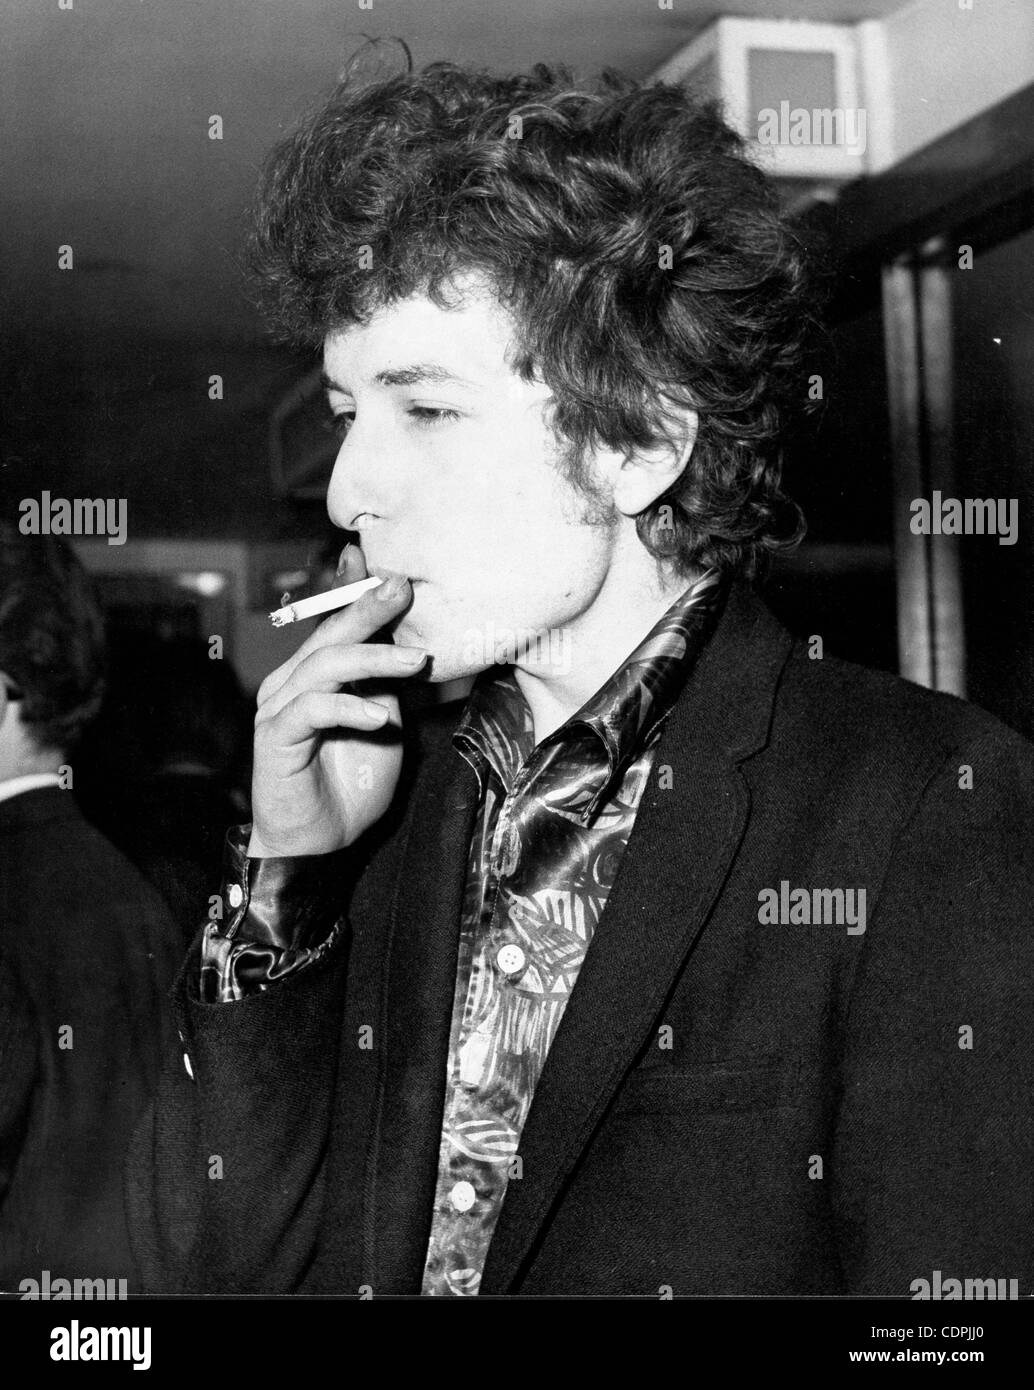 April 27, 1965 - London, England, U.K. - Folk Singer BOB DYLAN smoking a cigarette. Dylan is in town for his British tour at The Savoy Hotel. (Credit Image: © KEYSTONE Pictures/ZUMAPRESS.com) Stock Photo